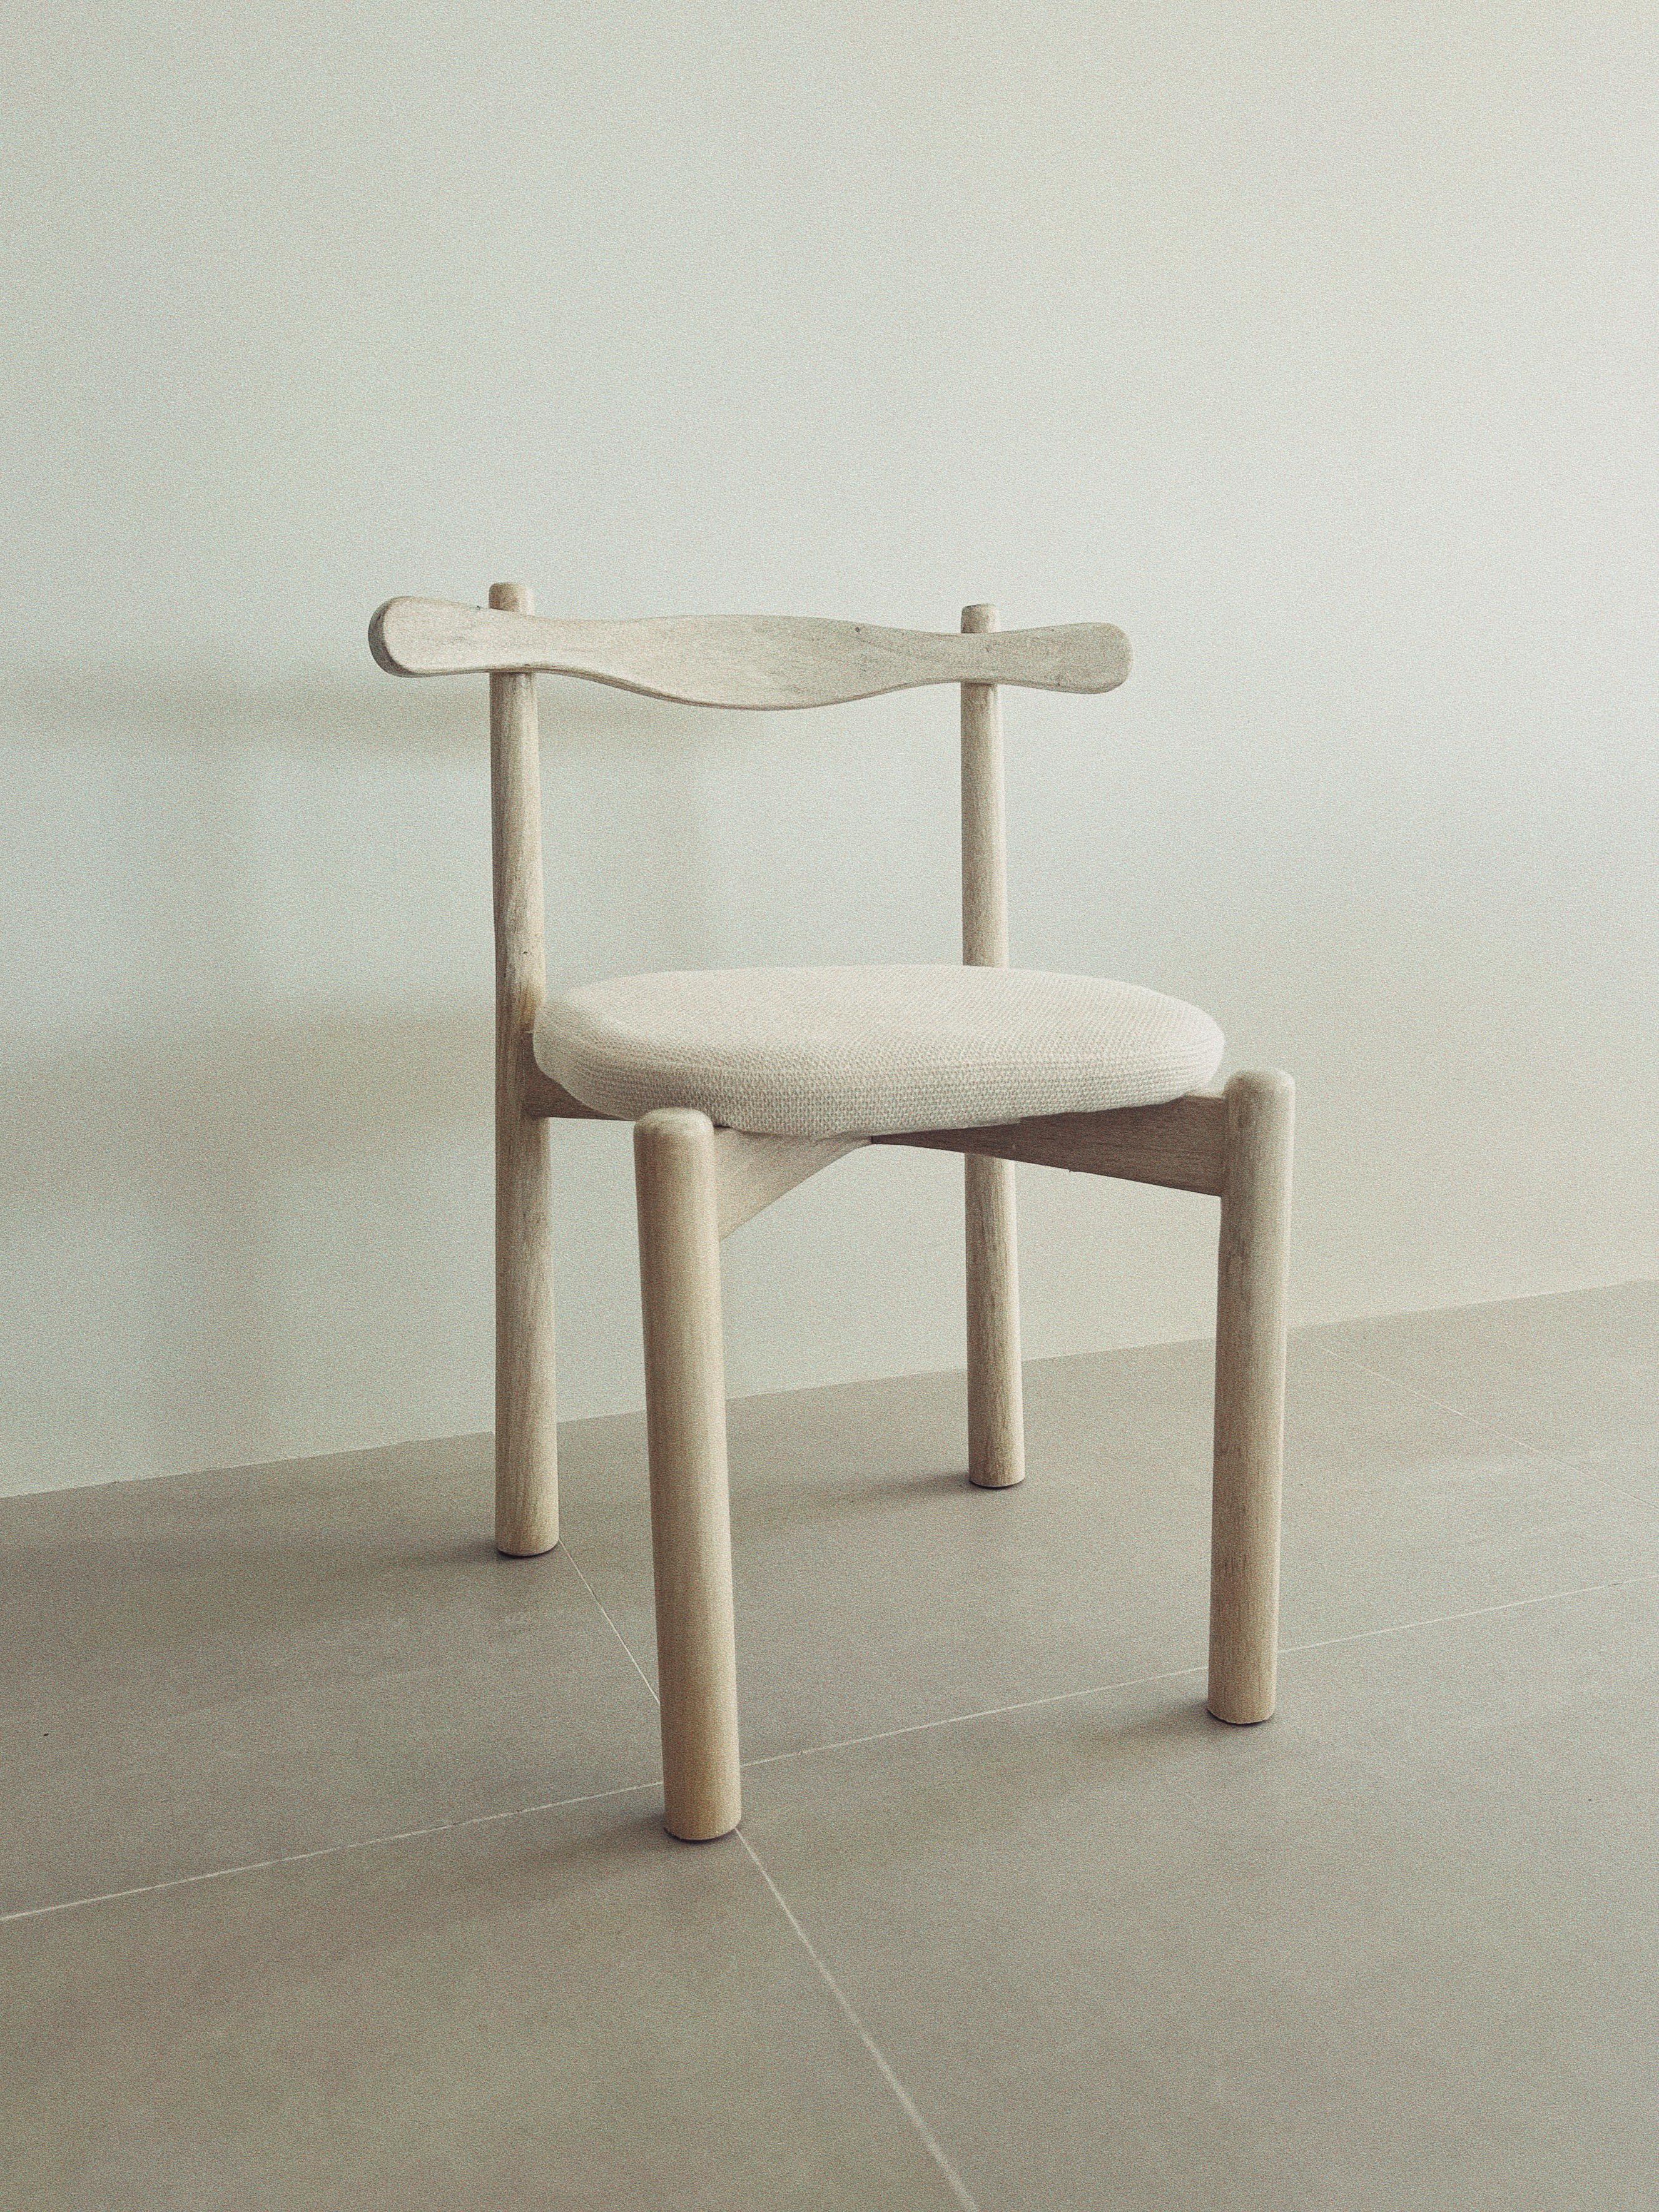 Uçá Chair - Imagine the warm mornings on the Brazilian coast, where the Uçá crustacean gracefully traces its path along the shoreline. This chair, named after the fascinating creature, captures its unique qualities, paying tribute to the marine